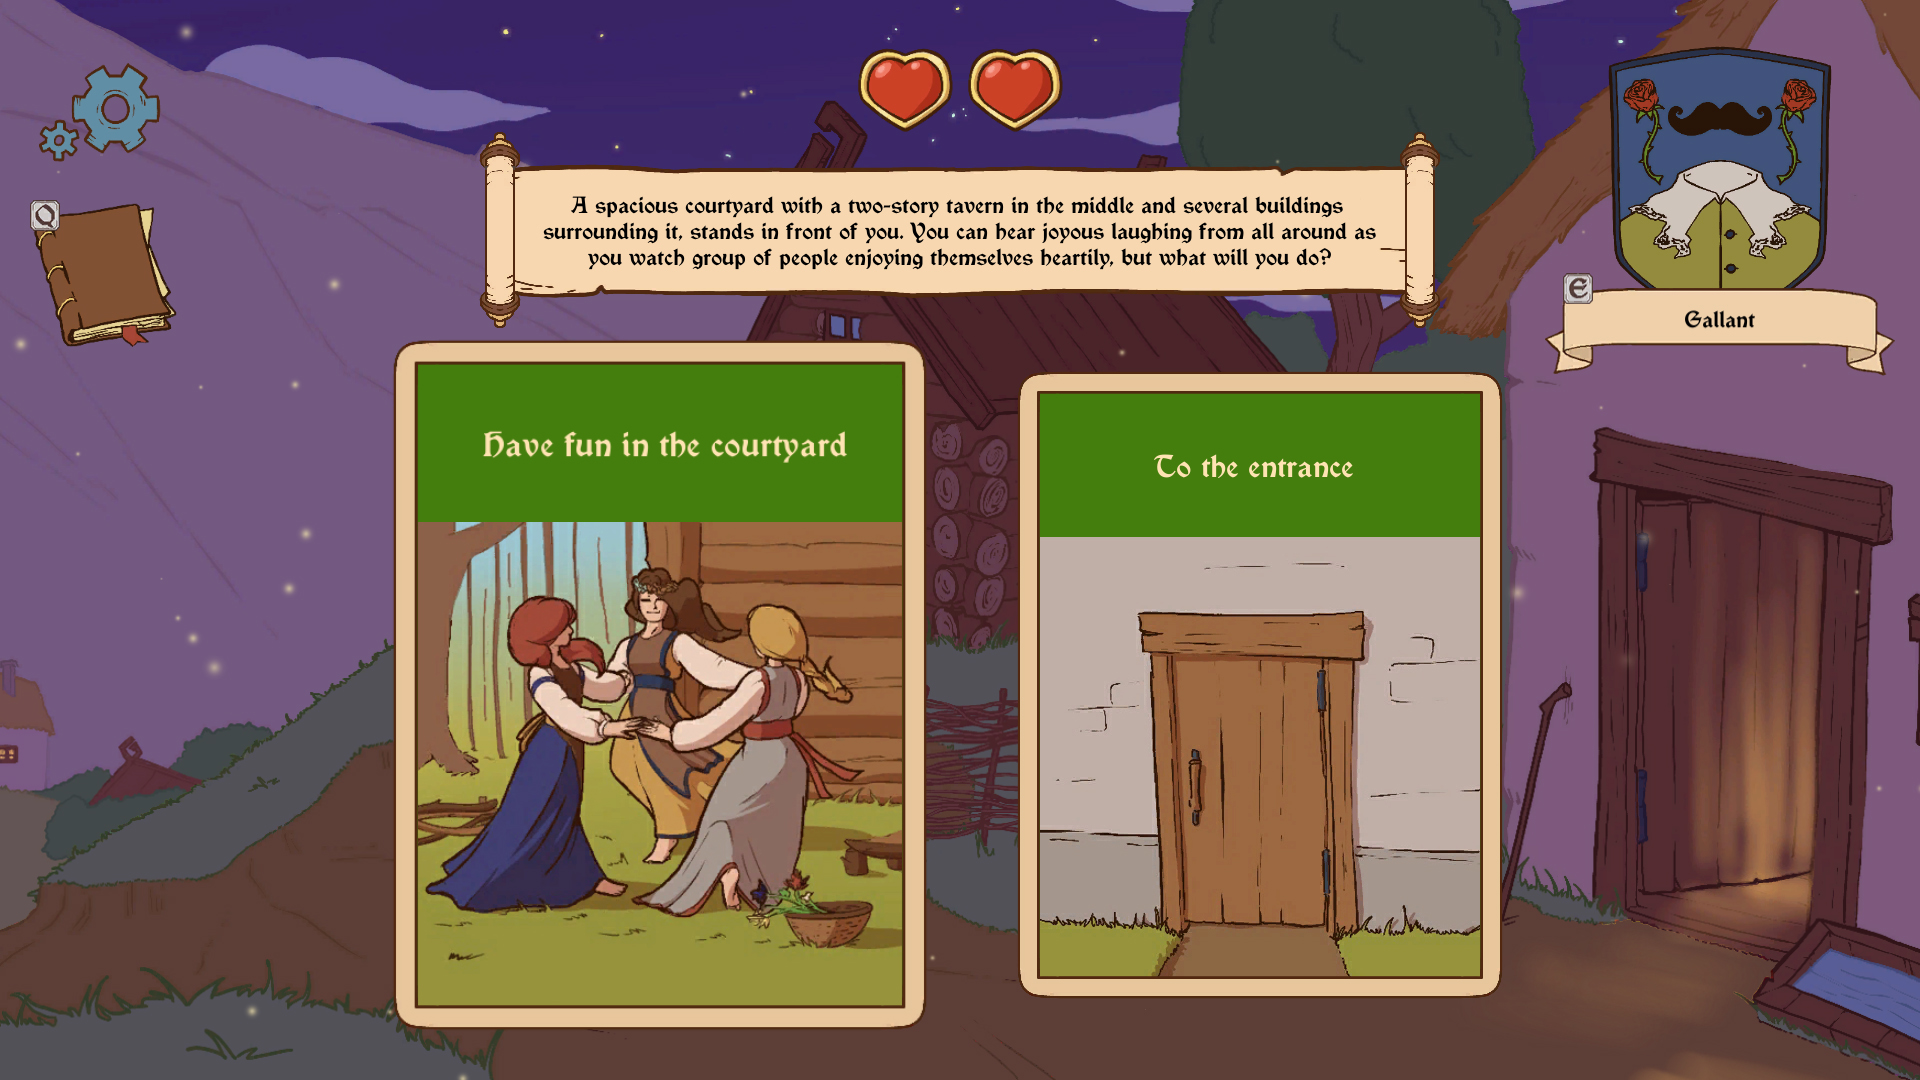 Full version of Android Gamebook game apk Choice of Life: Middle Ages 2 for tablet and phone.